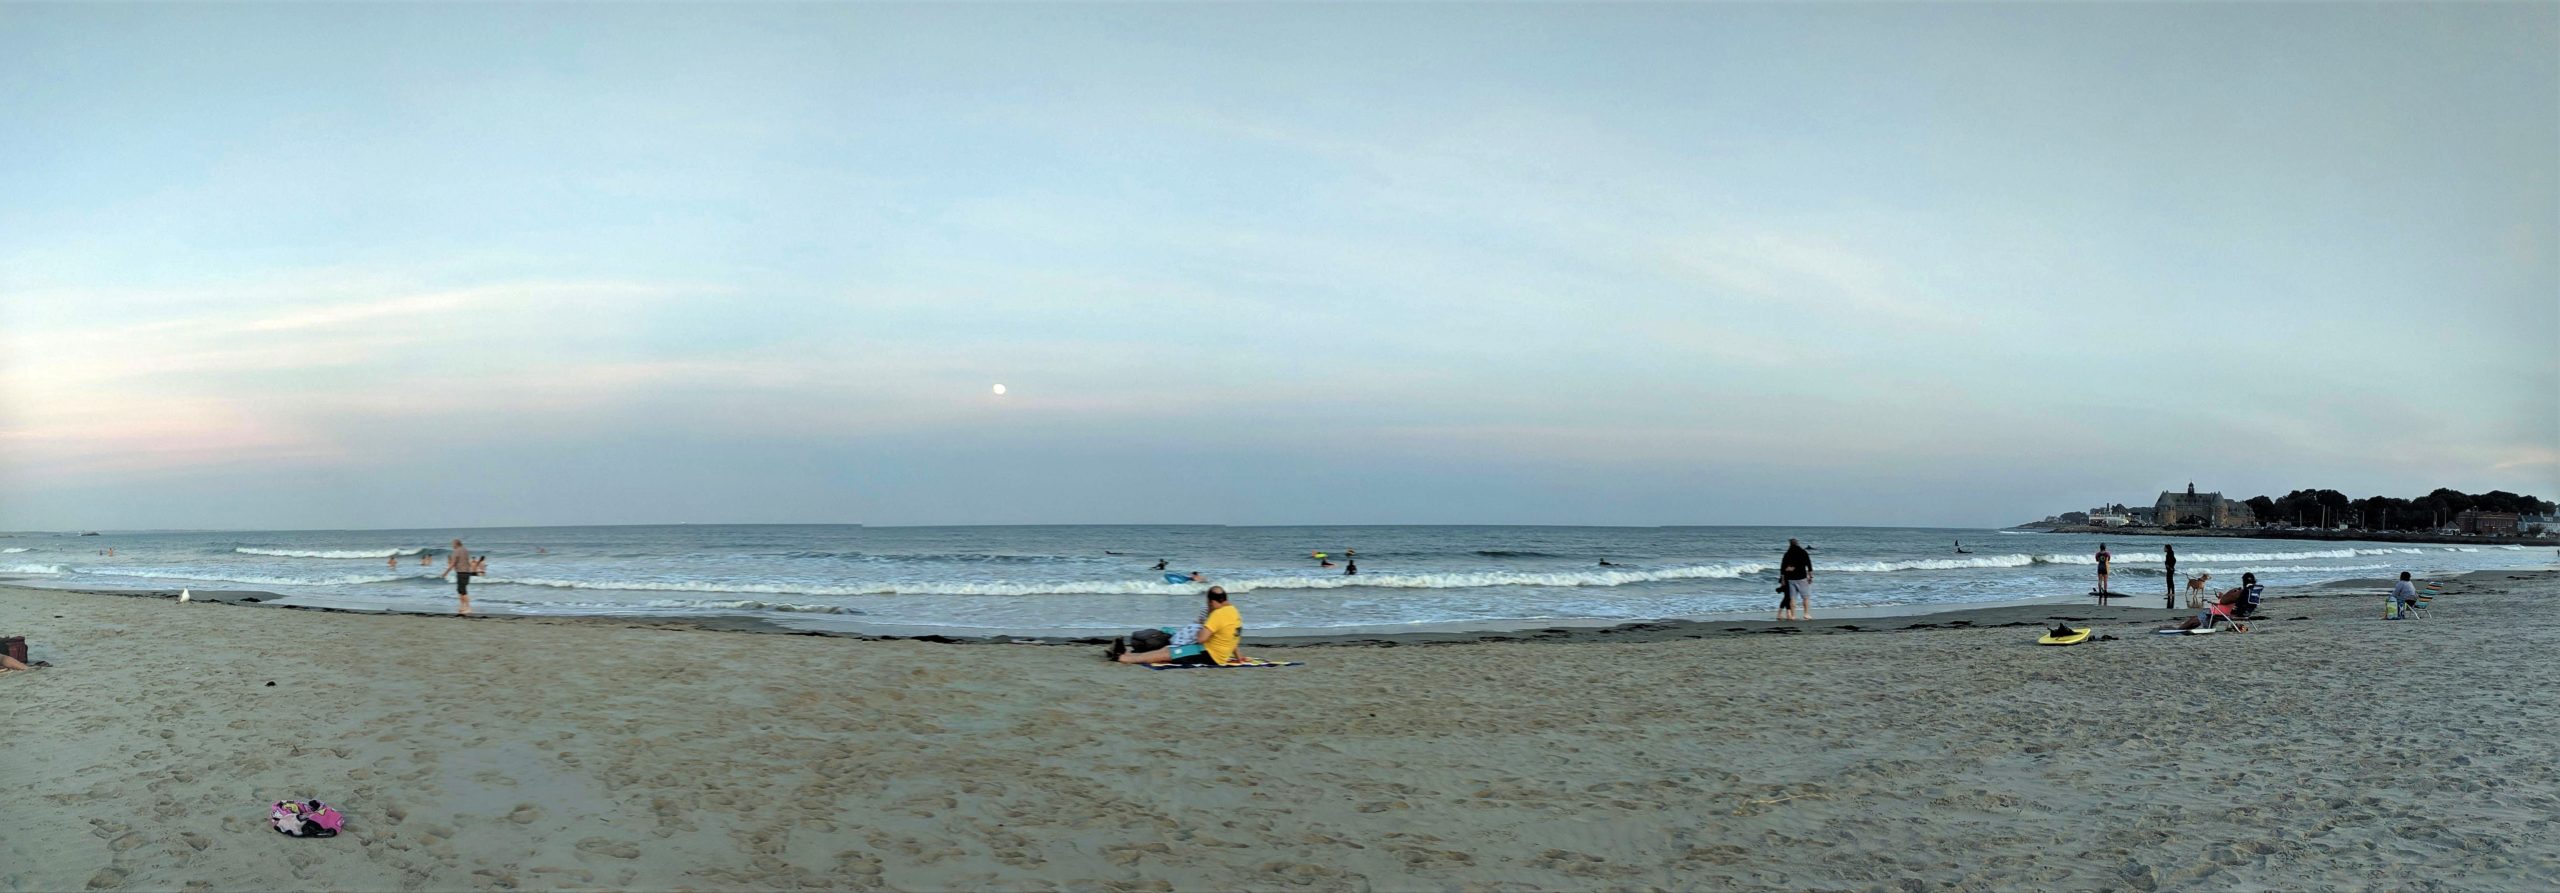 public beach in evening with moon rising over ocean